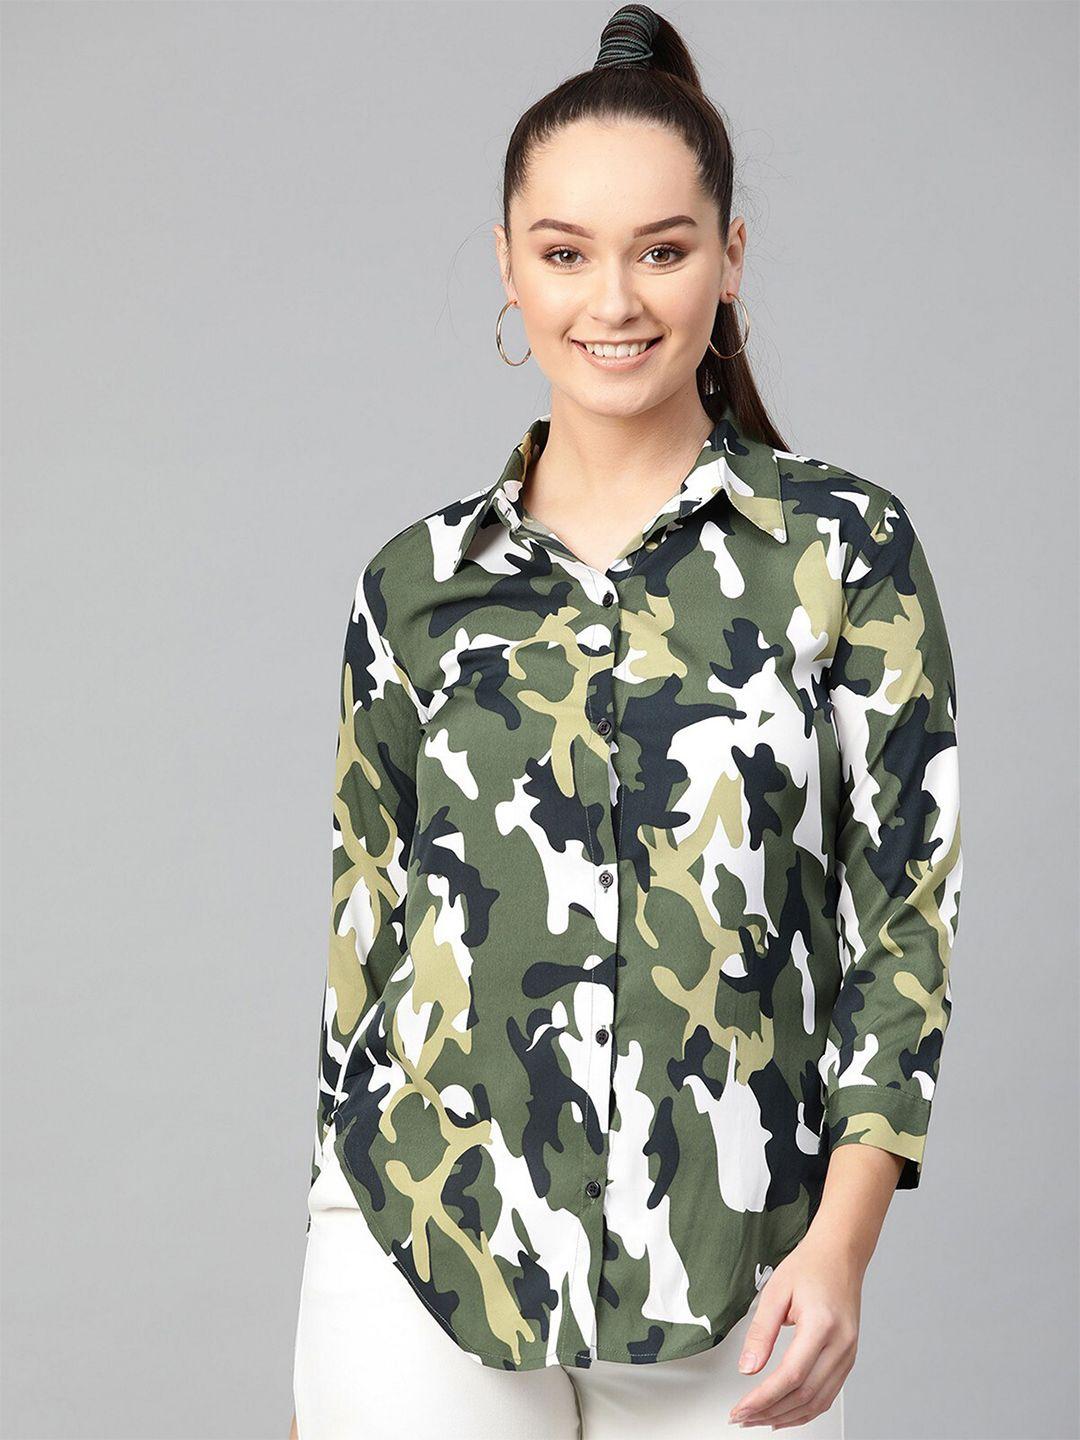 zima leto green & white camouflage printed crepe shirt style top